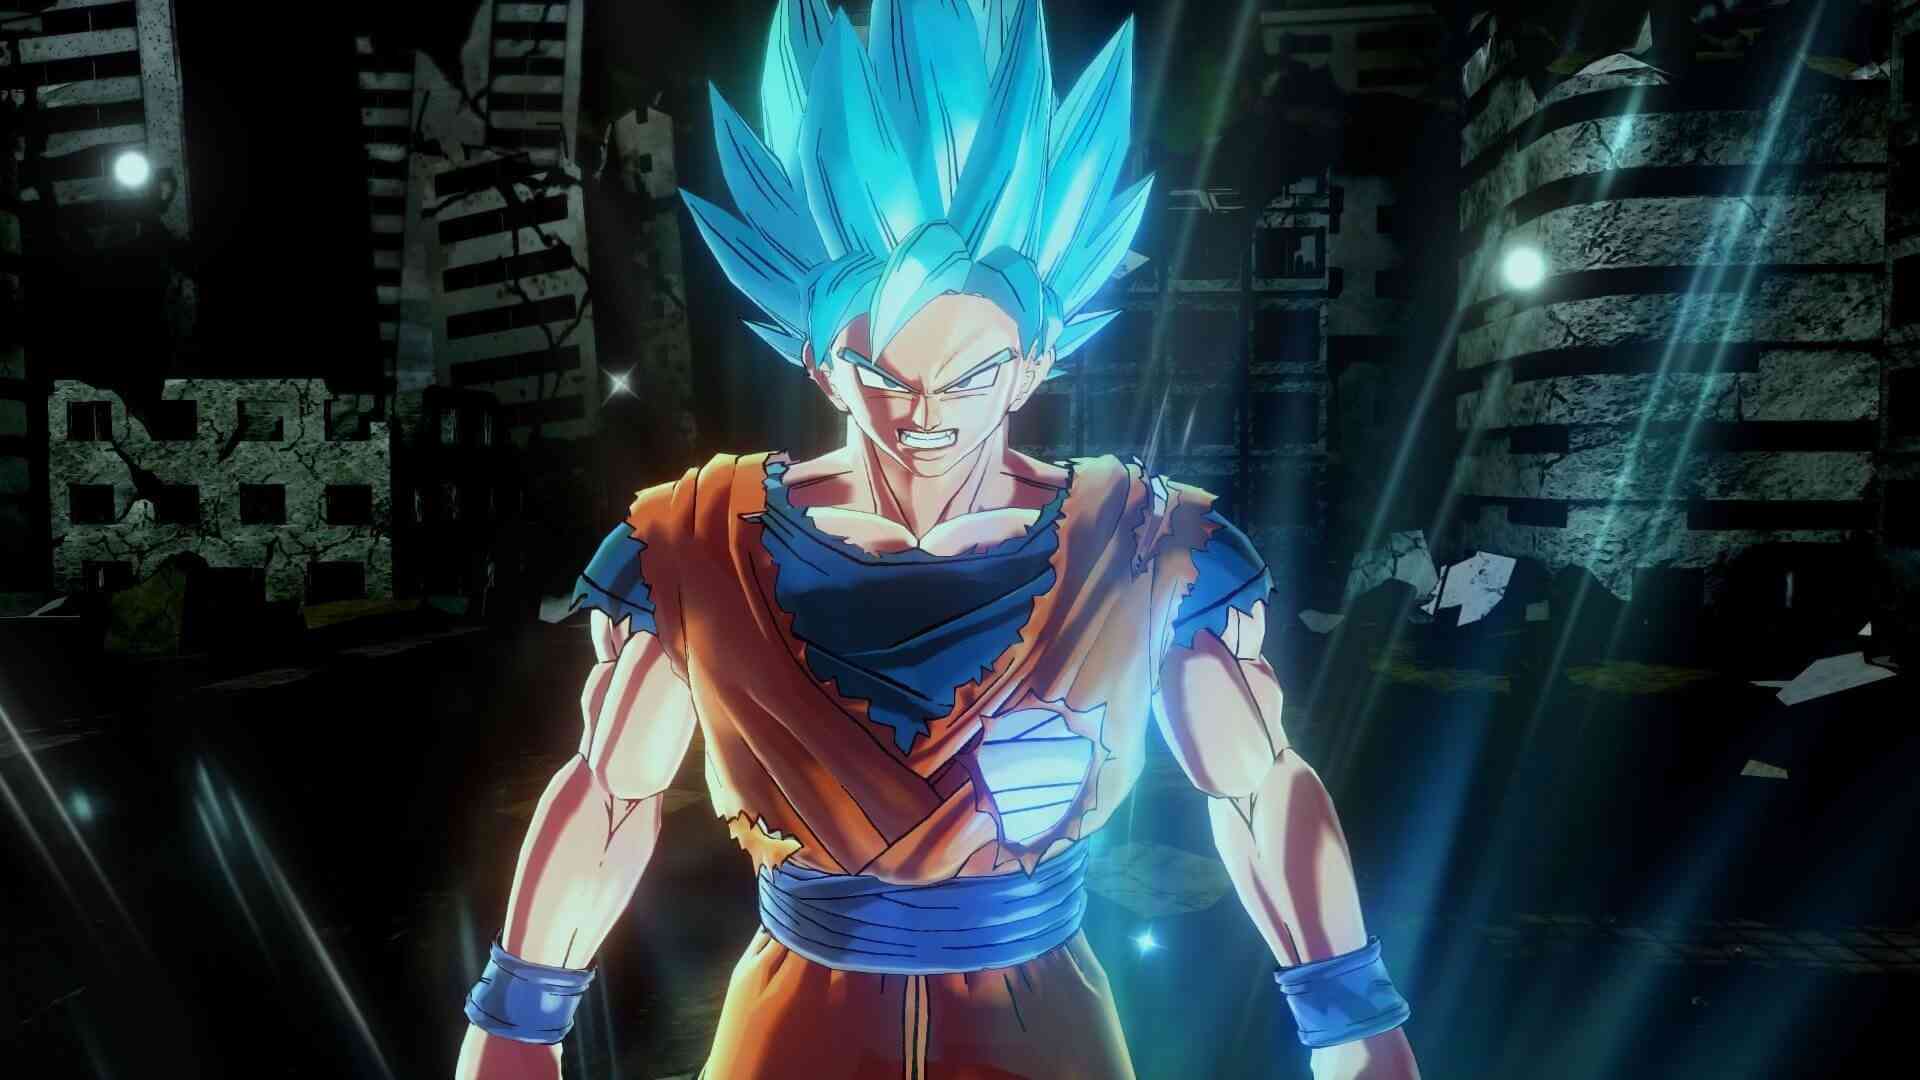 action rpg game dragon ball project z was announced 1391 big 1